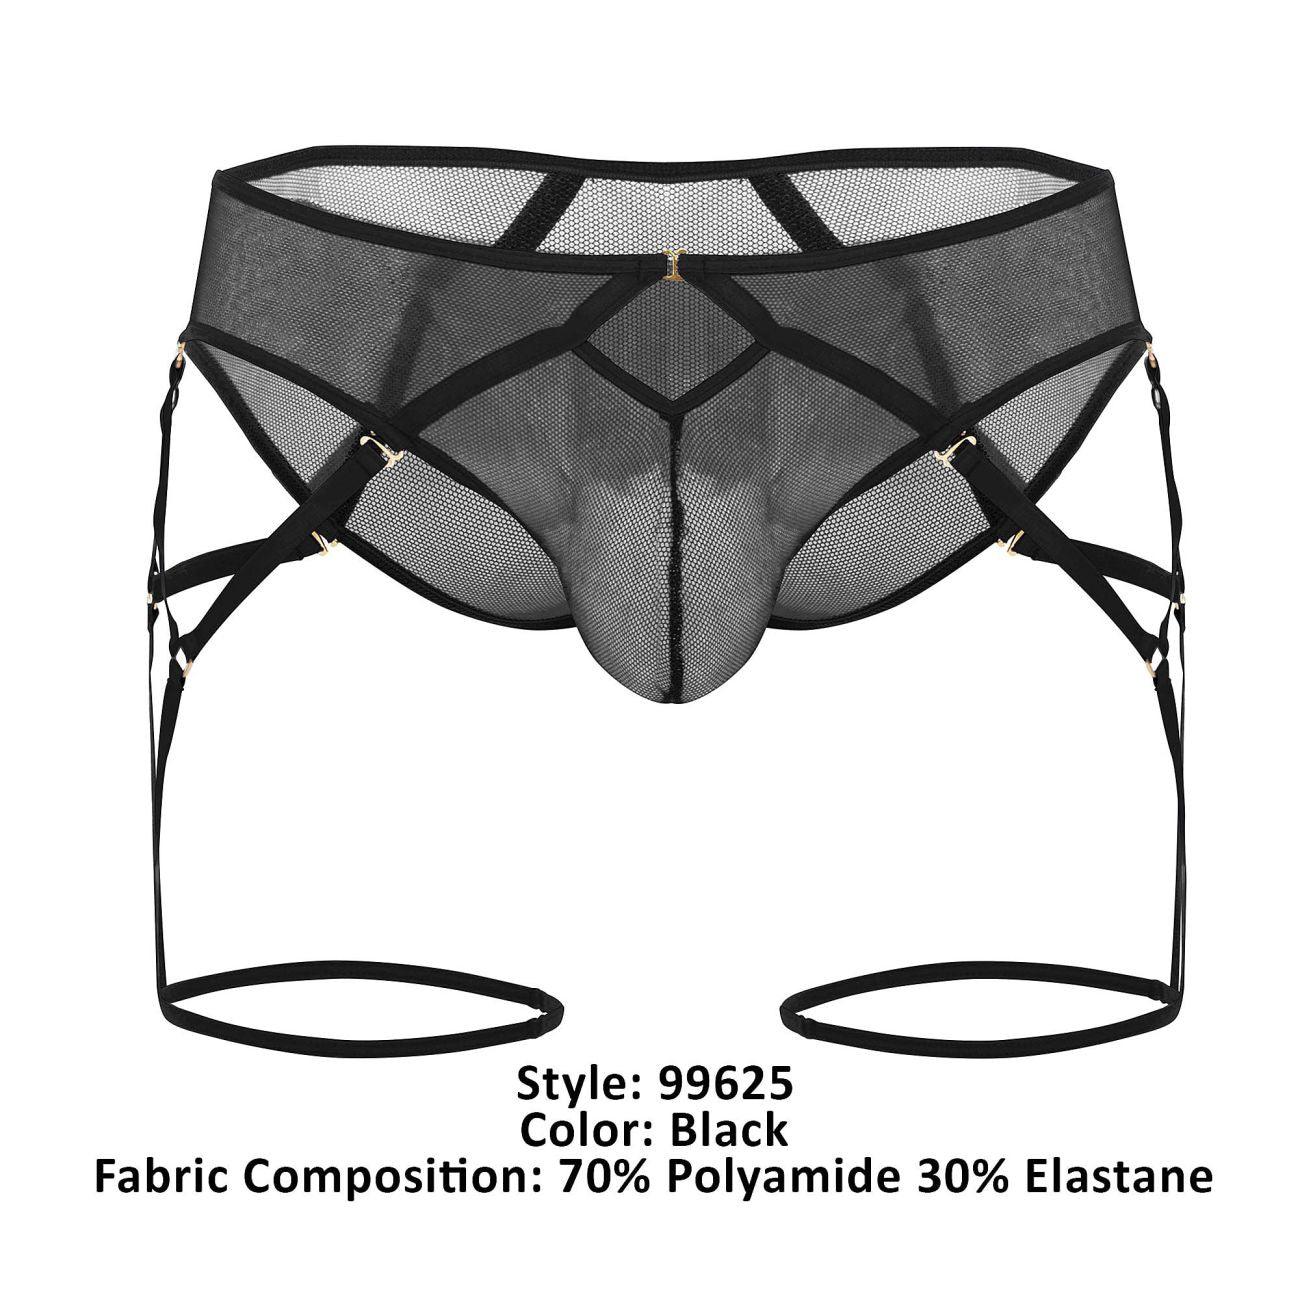 image of product,Mesh Garter Briefs - {{ SEXYEONE }}